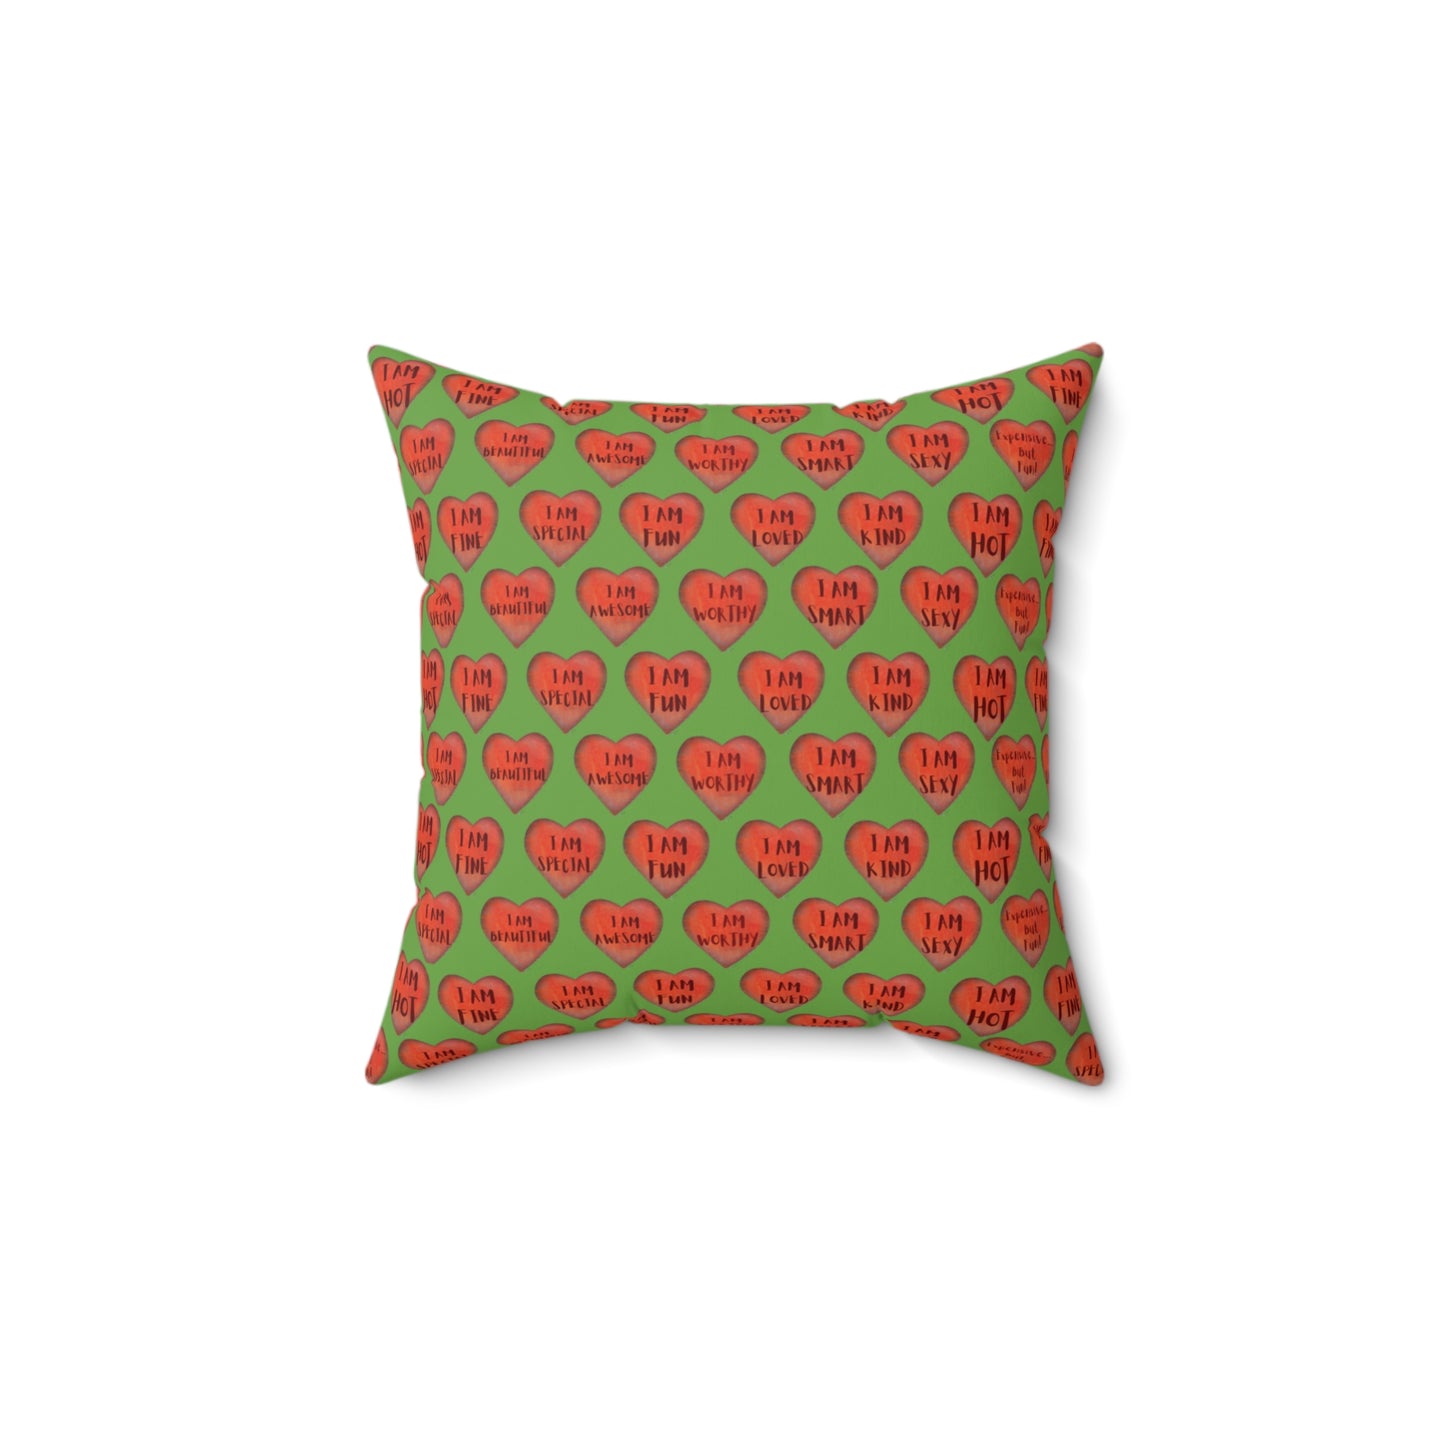 Colorful Faux Suede Pillow - Red Heart motivational pillow - Green Throw Pillow - Inspirational Decorative pillow